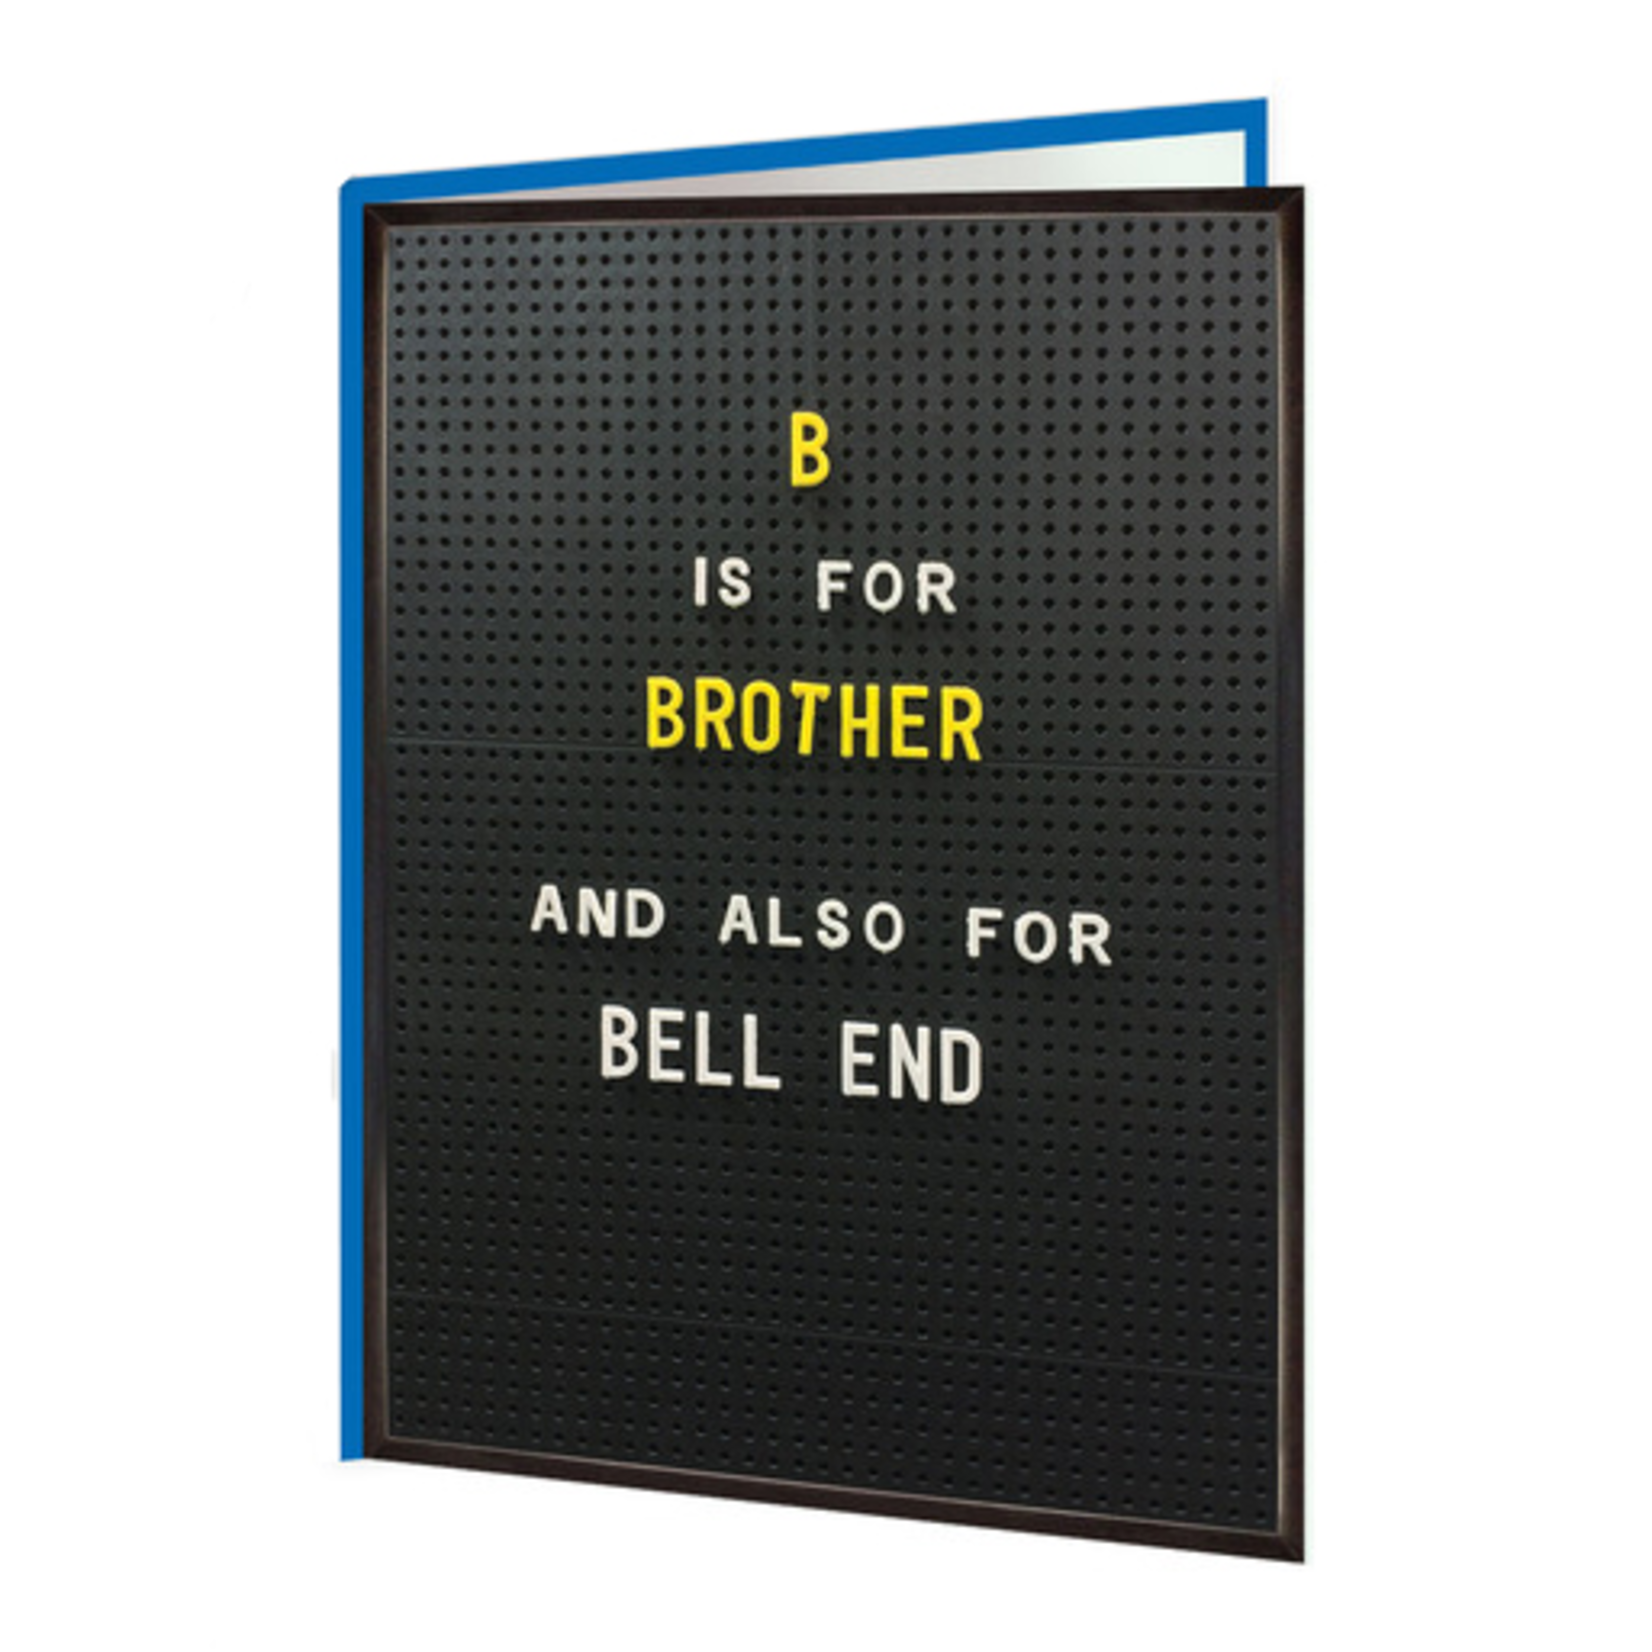 B is for Brother Card